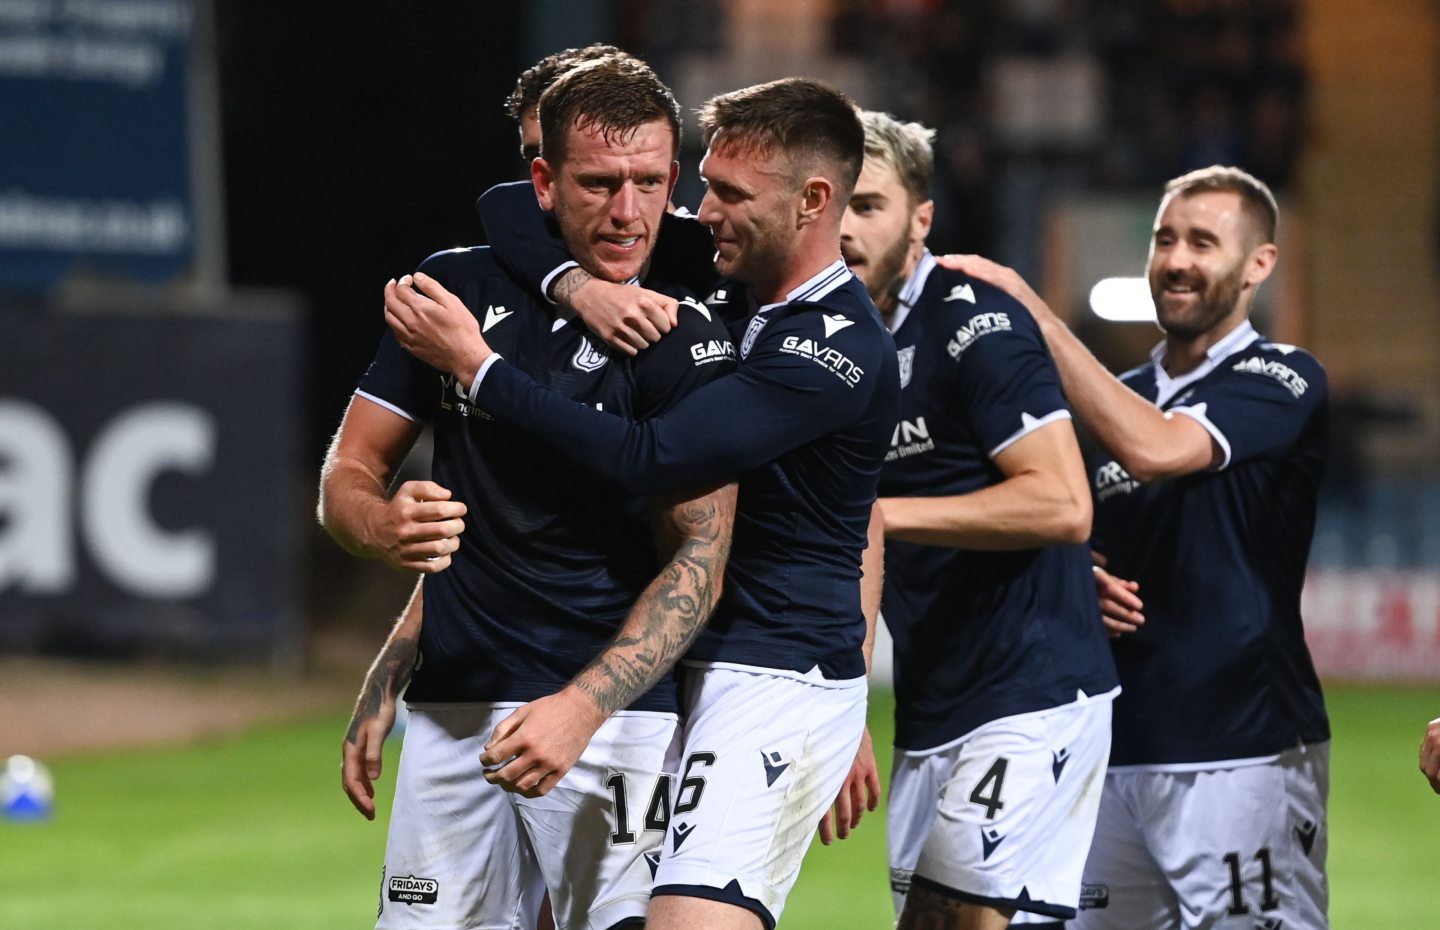 Lee Ashcroft is mobbed by his teammates after scoring against Falkirk in the Premier Sports Cup.